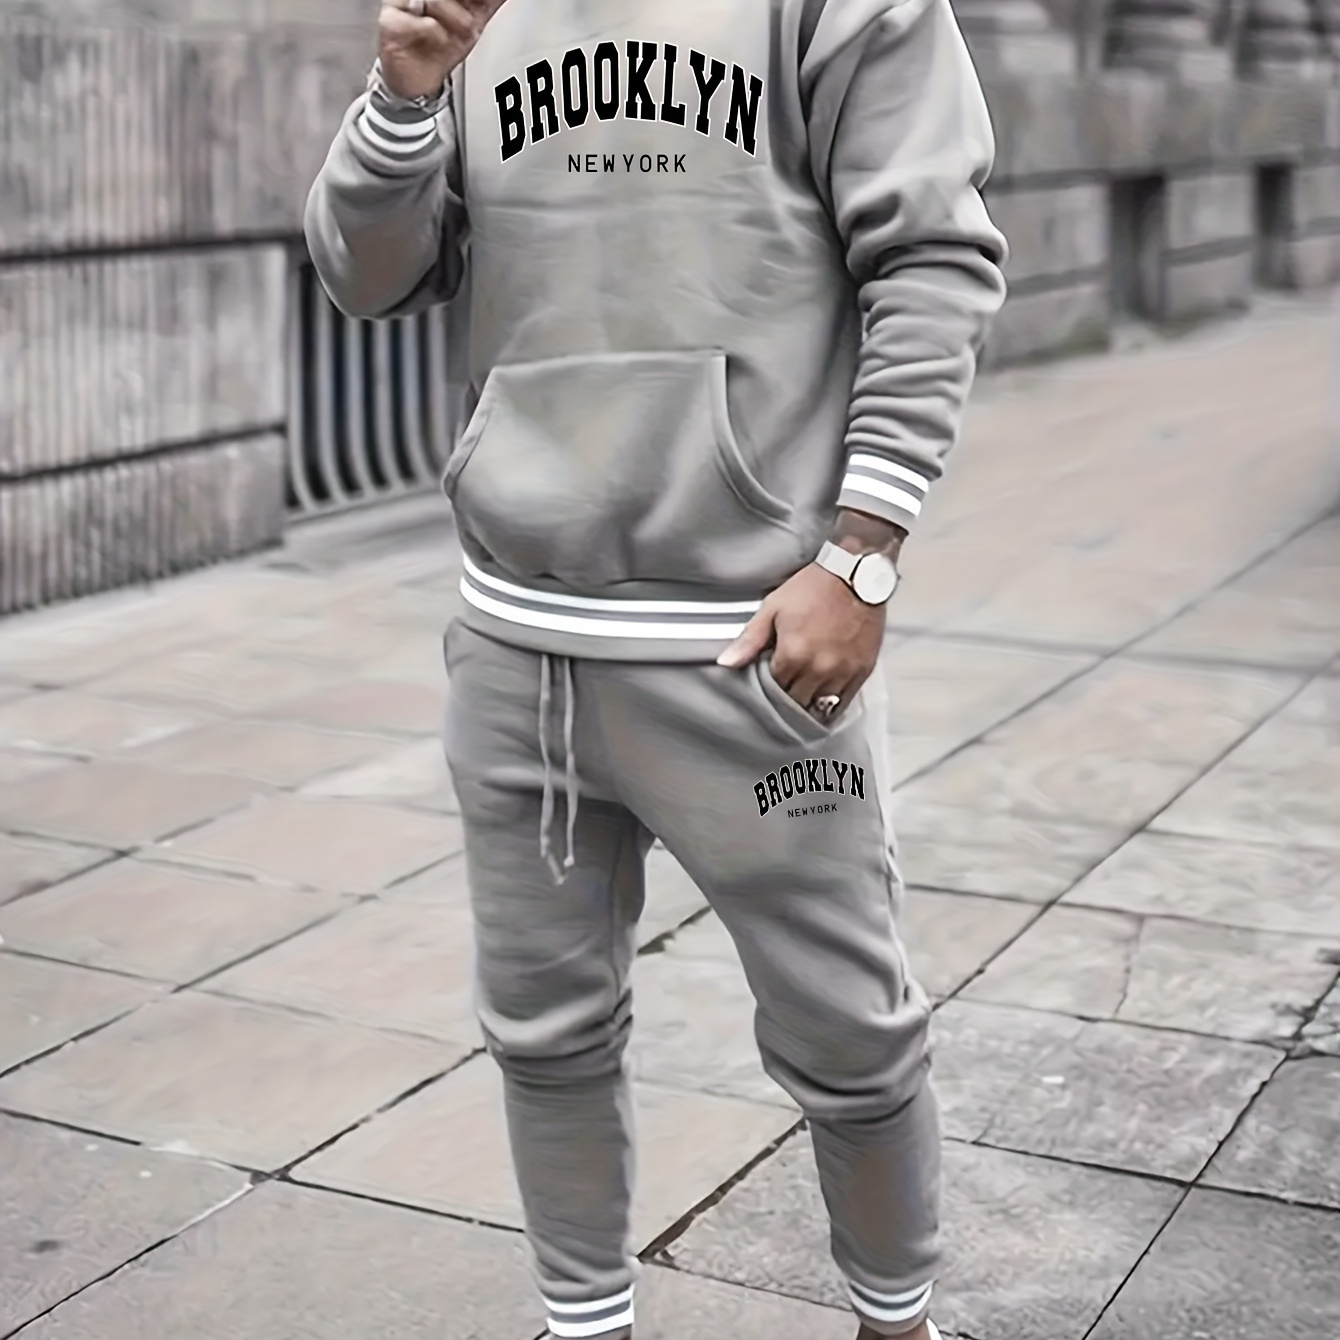 

2pcs Men's Trendy Brooklyn Letter Print Hooded Outfit, Hoodie & Pants Set, Men's Clothes For Spring Fall Winter, As Gift